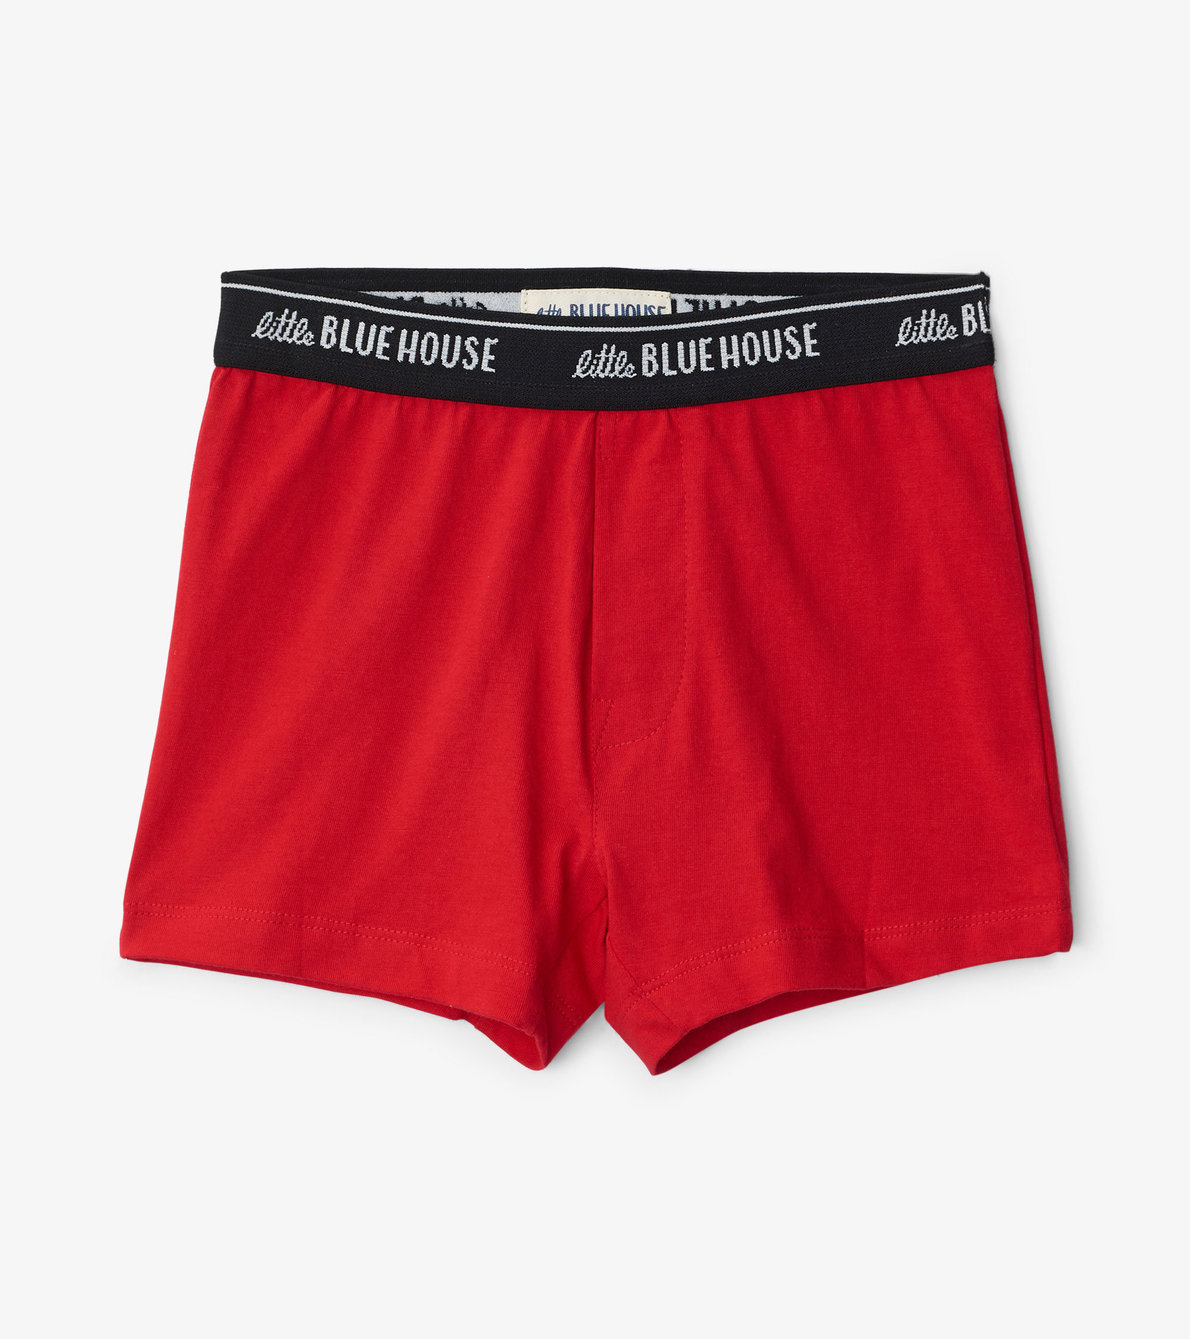 View larger image of Happy Camper Boys' Boxer Briefs